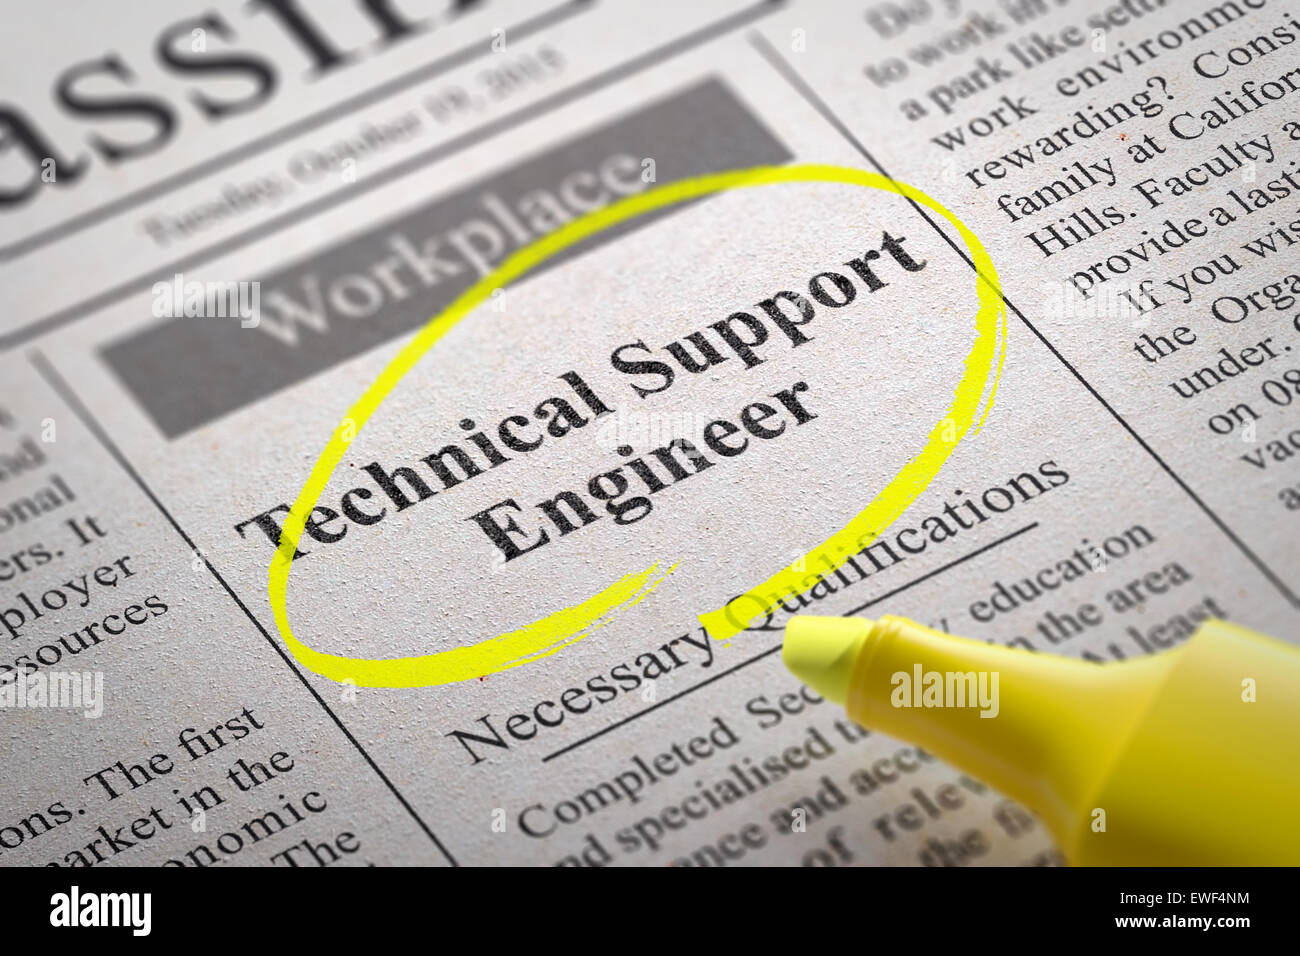 Technical Support Engineer Vacancy in Newspaper. Stock Photo